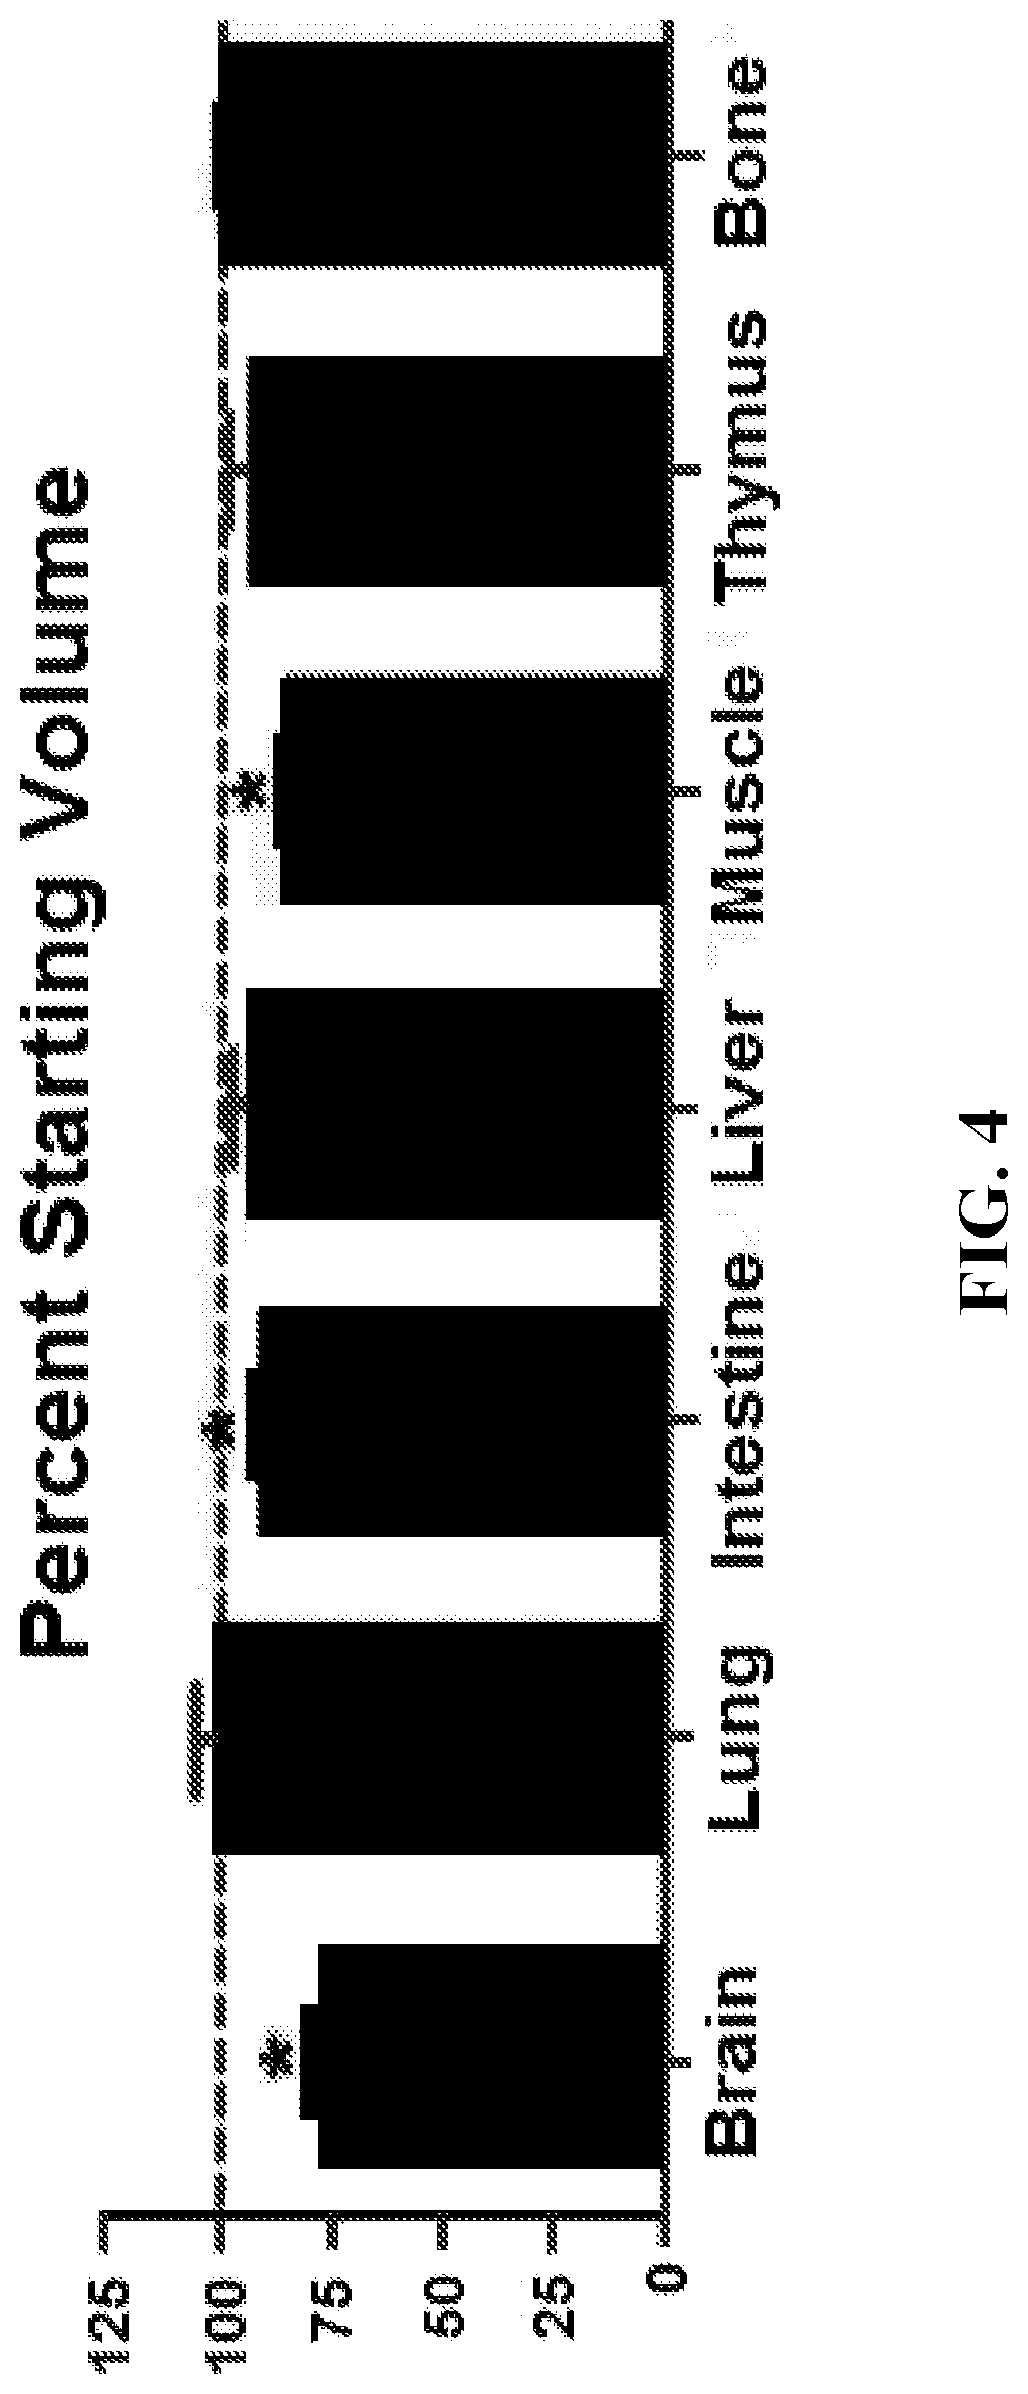 Method and composition for optical clearing of tissues